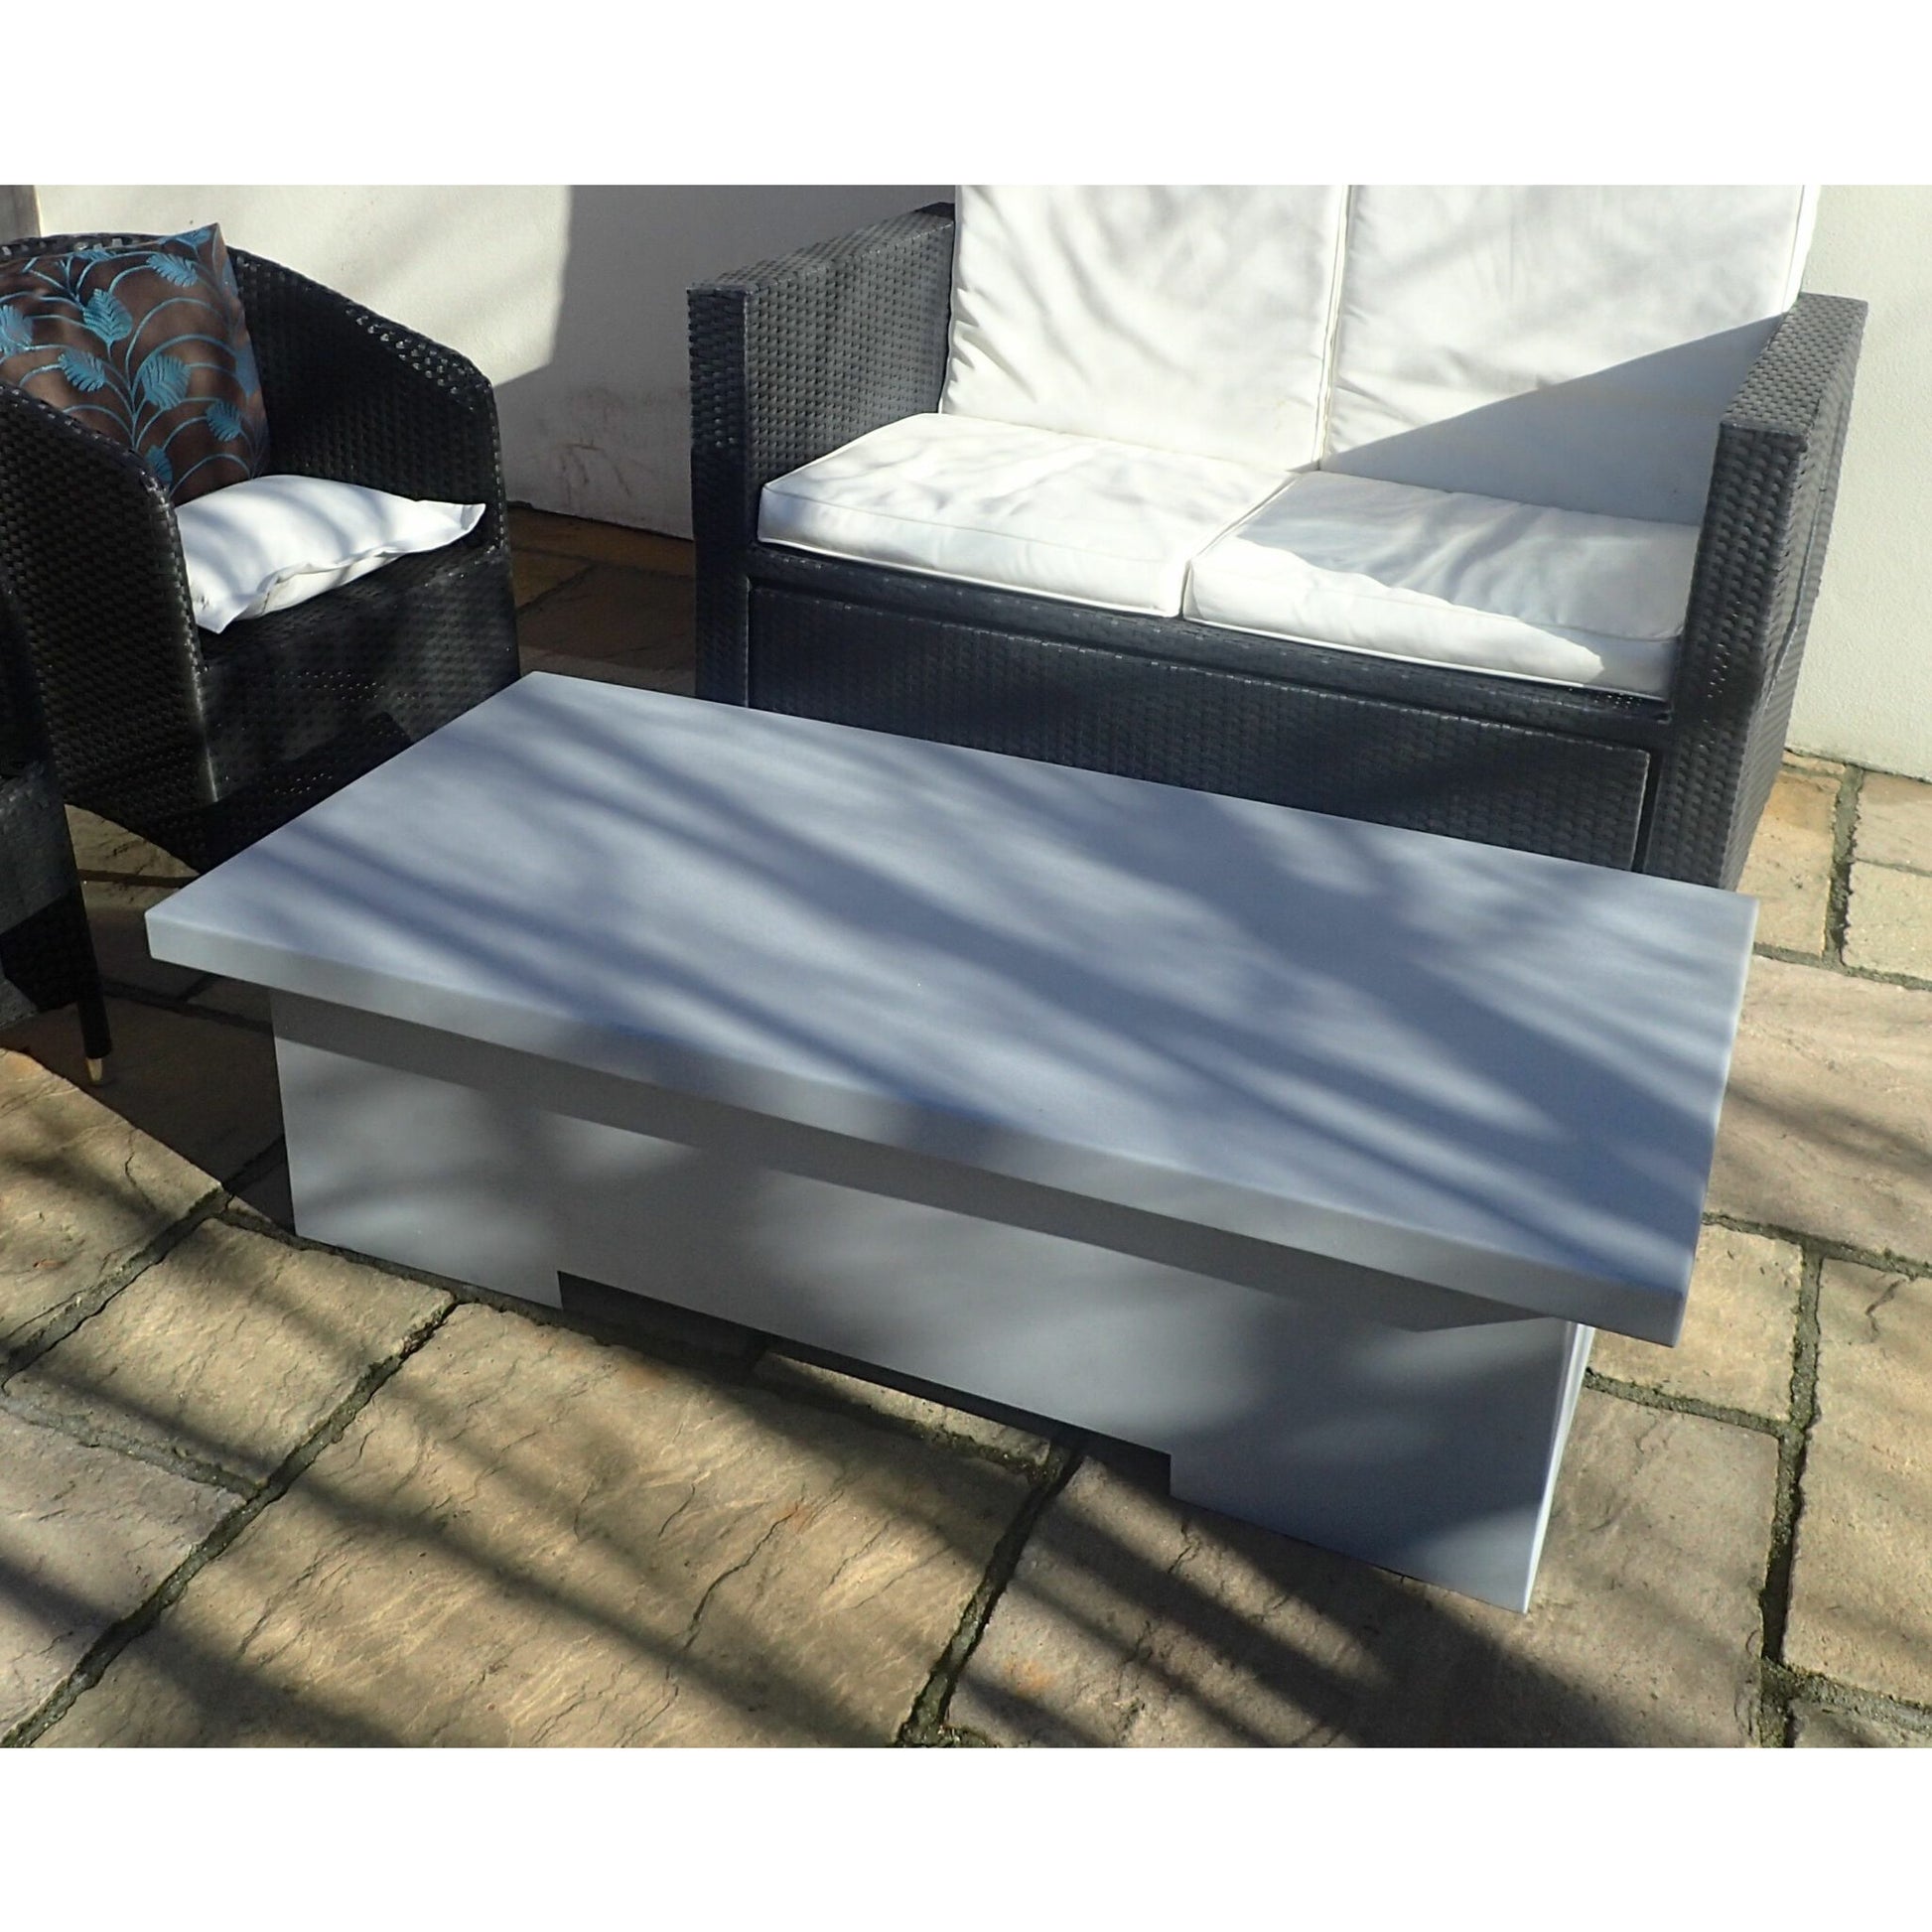 Brightstar Fires - Titan Gas Zinc Fire Pit Table - Rectangular - Luxury Fire Pits - PadioLiving - Brightstar Fires - Titan Gas Zinc Fire Pit Table - Rectangular - Luxury Fire Pits - Fire Pit Table - PadioLiving